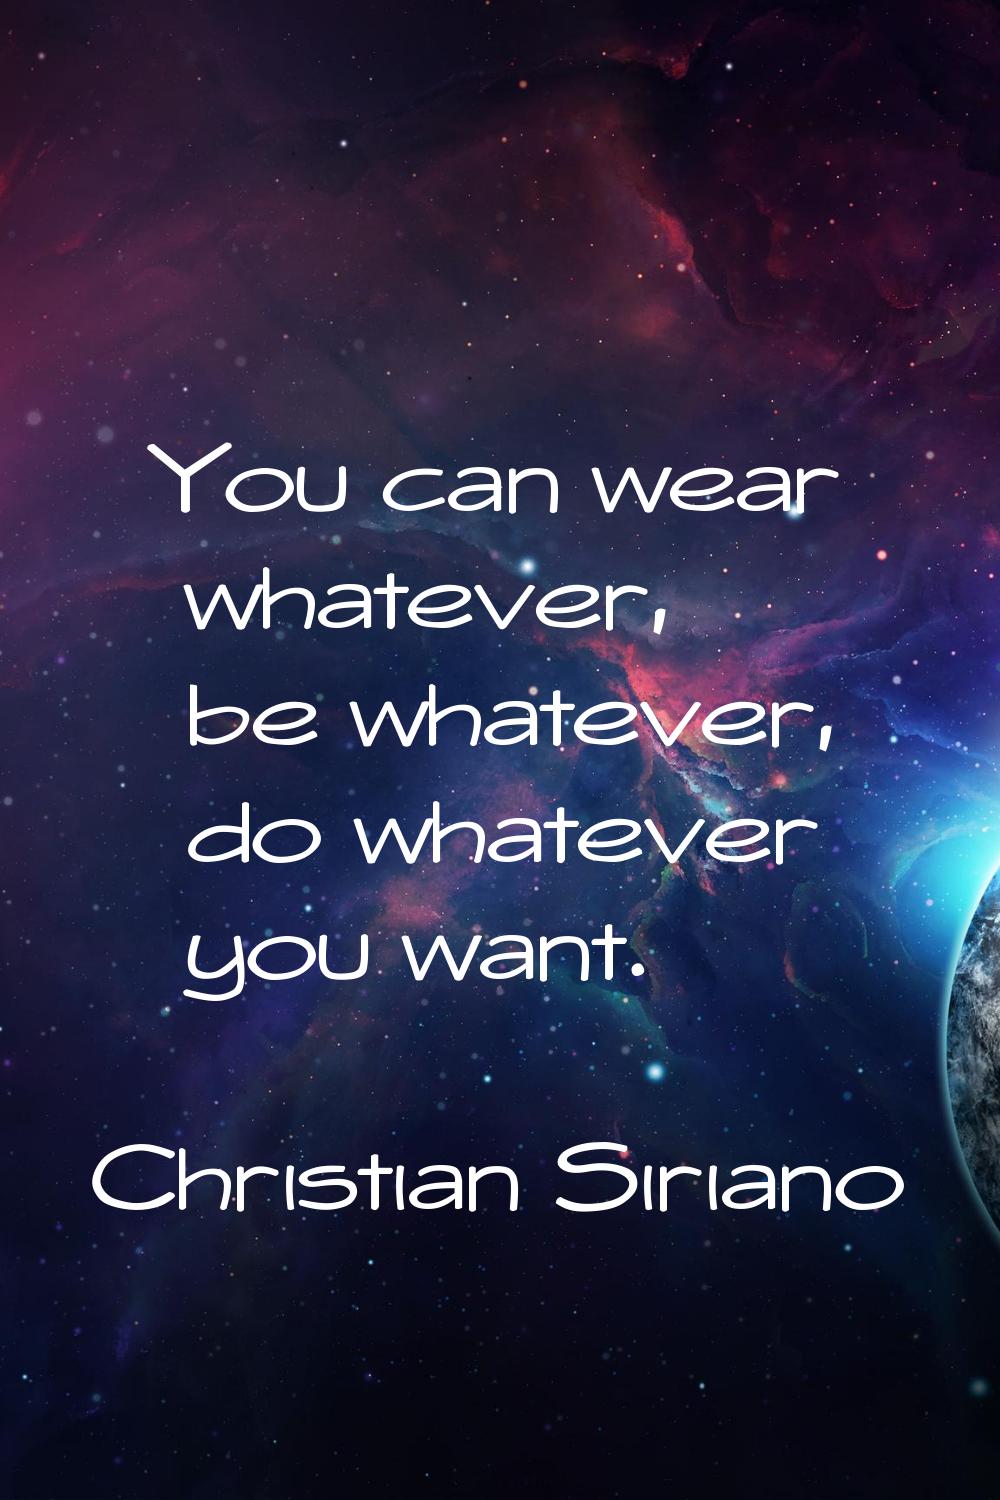 You can wear whatever, be whatever, do whatever you want.